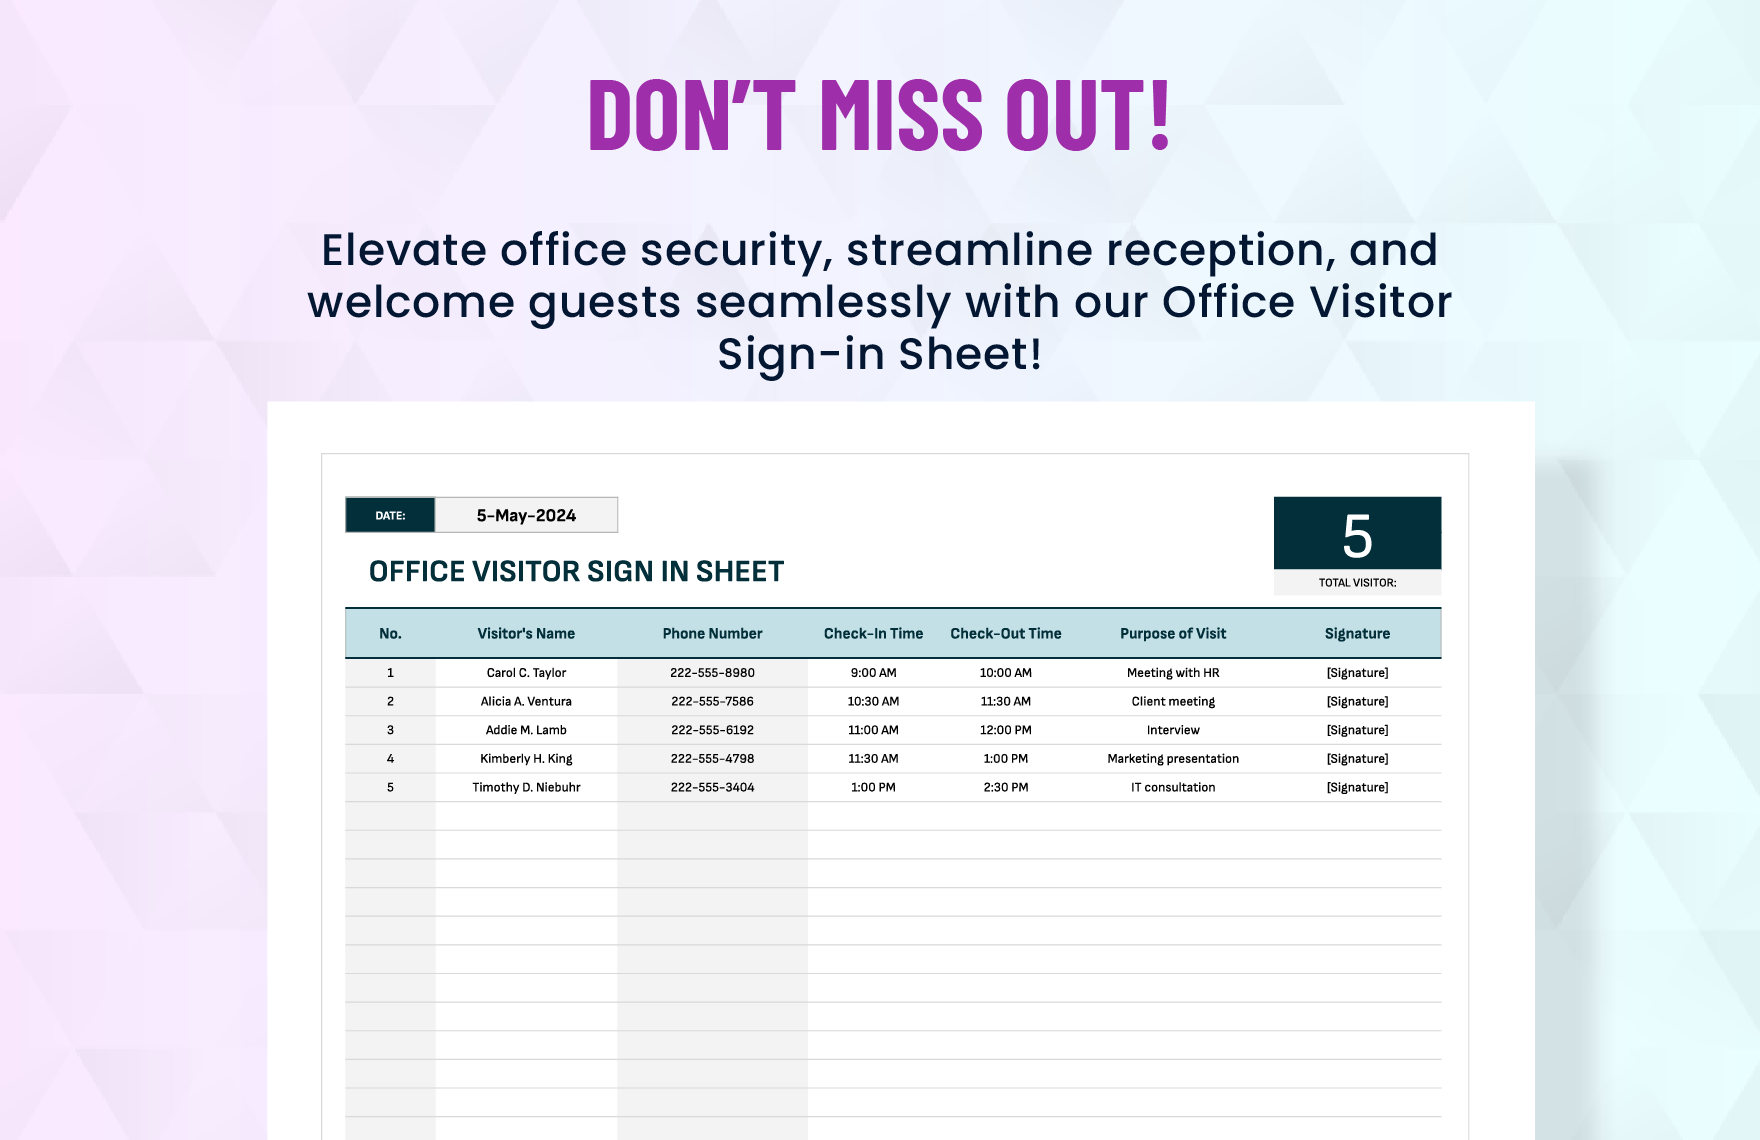 Office Visitor Sign in Sheet Template